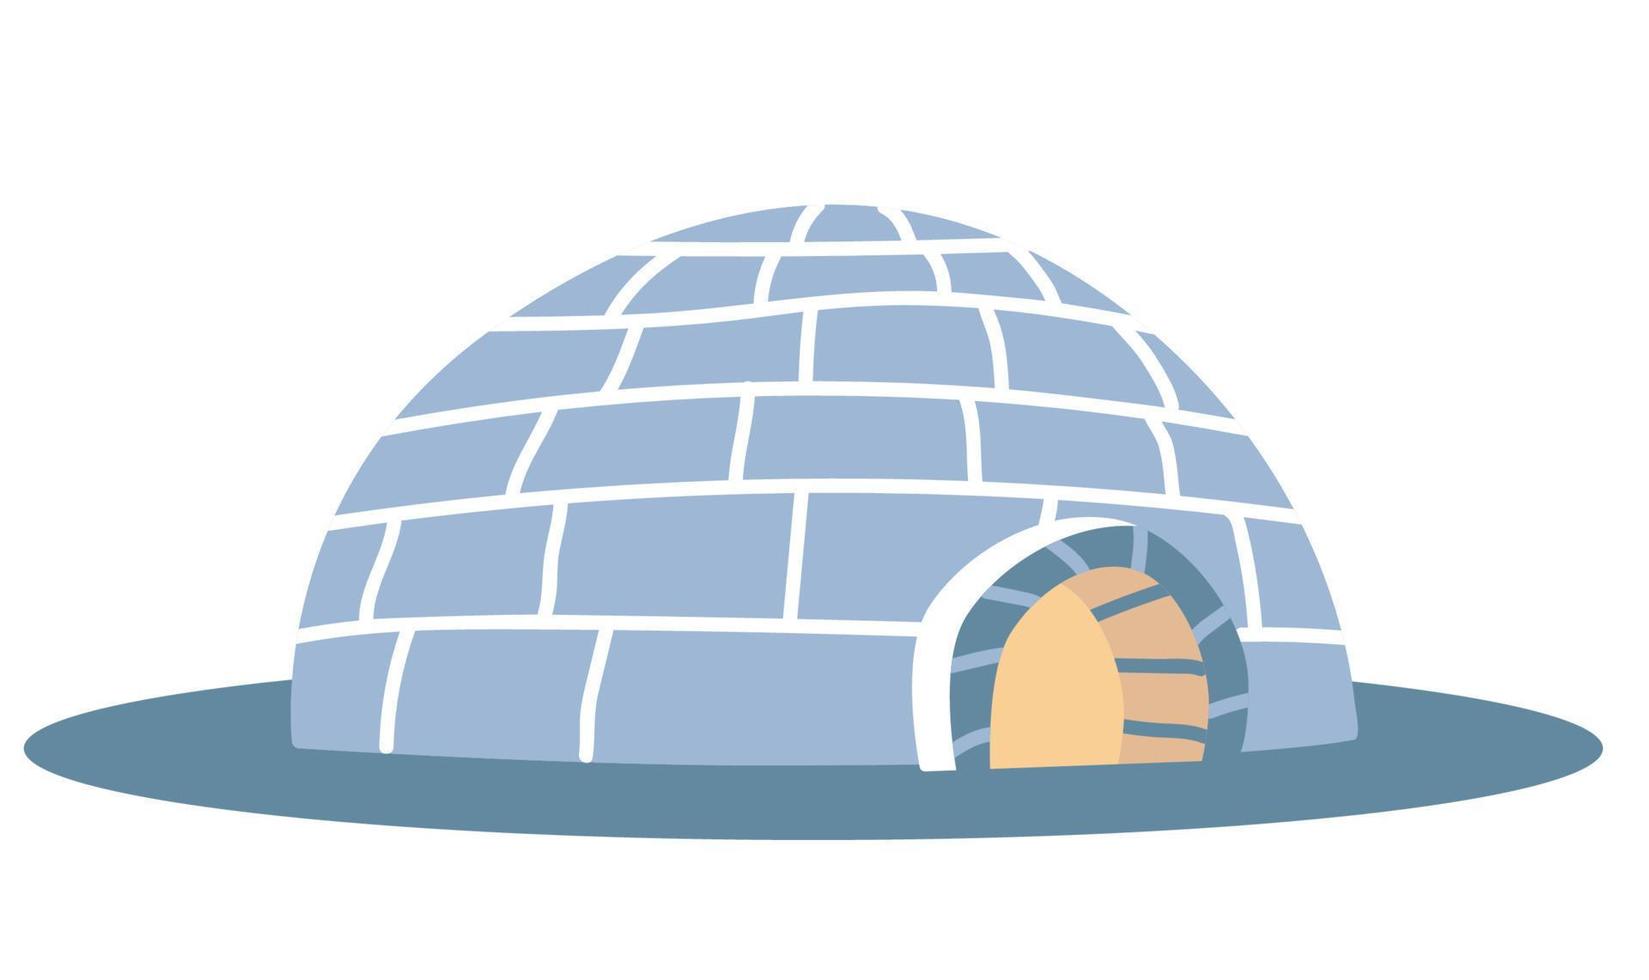 Igloo, icy cold house, winter built from ice blocks Illustration. vector